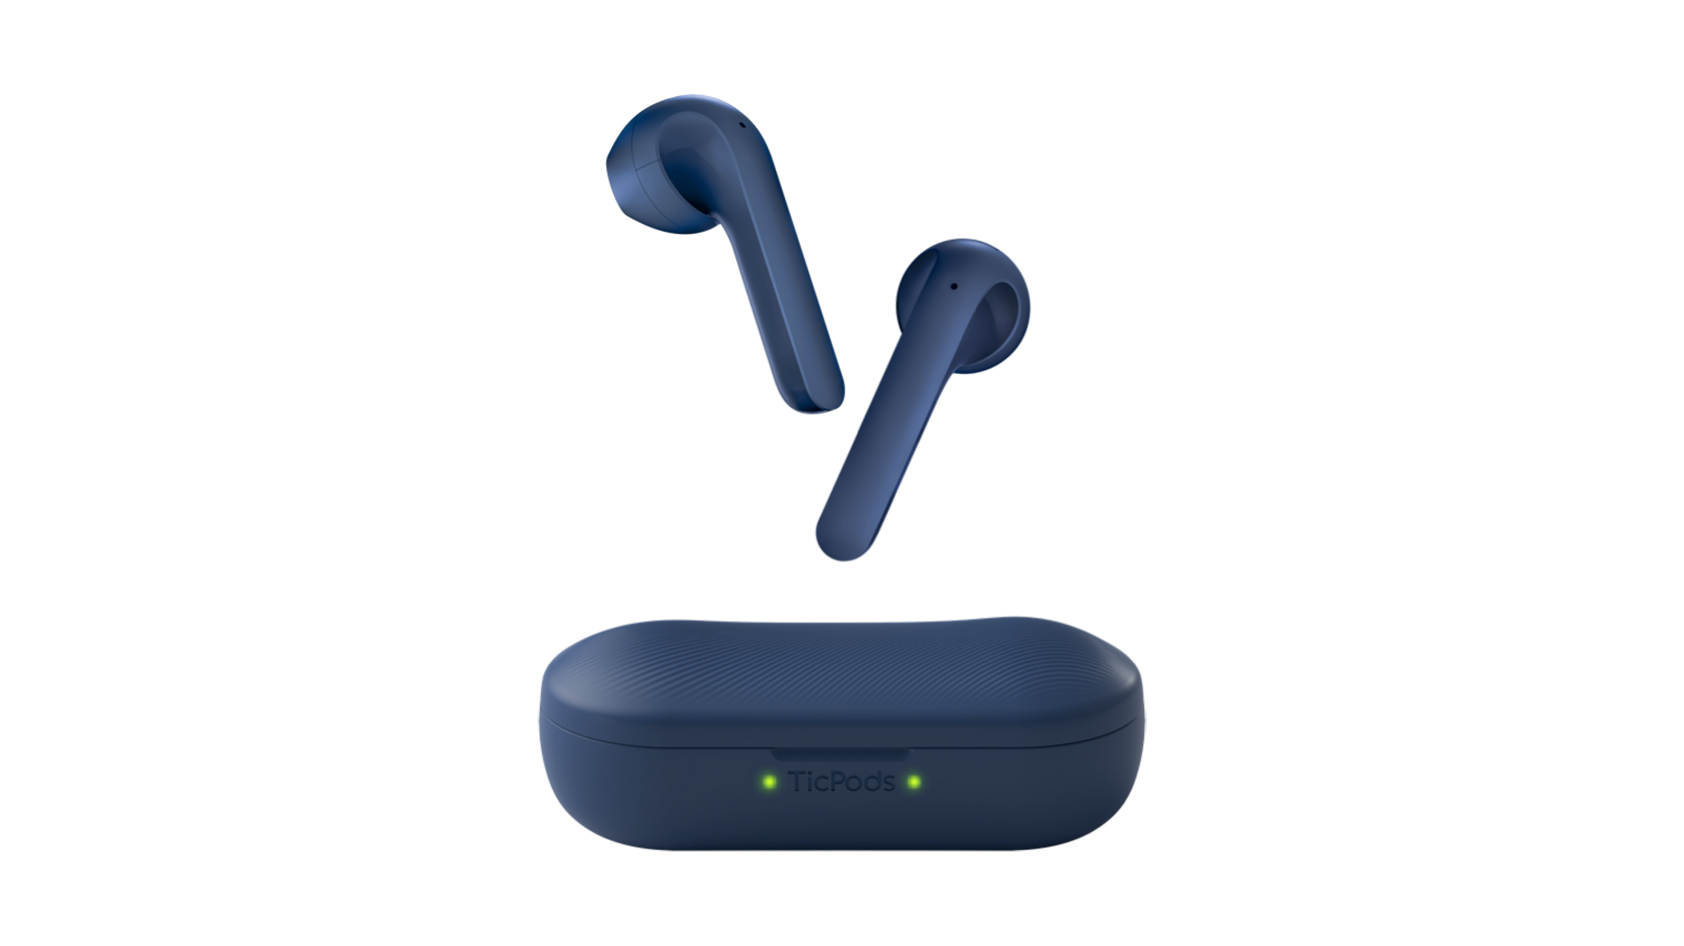 A product render of the Mobvoi TicPods 2 Pro in navy against a white background.